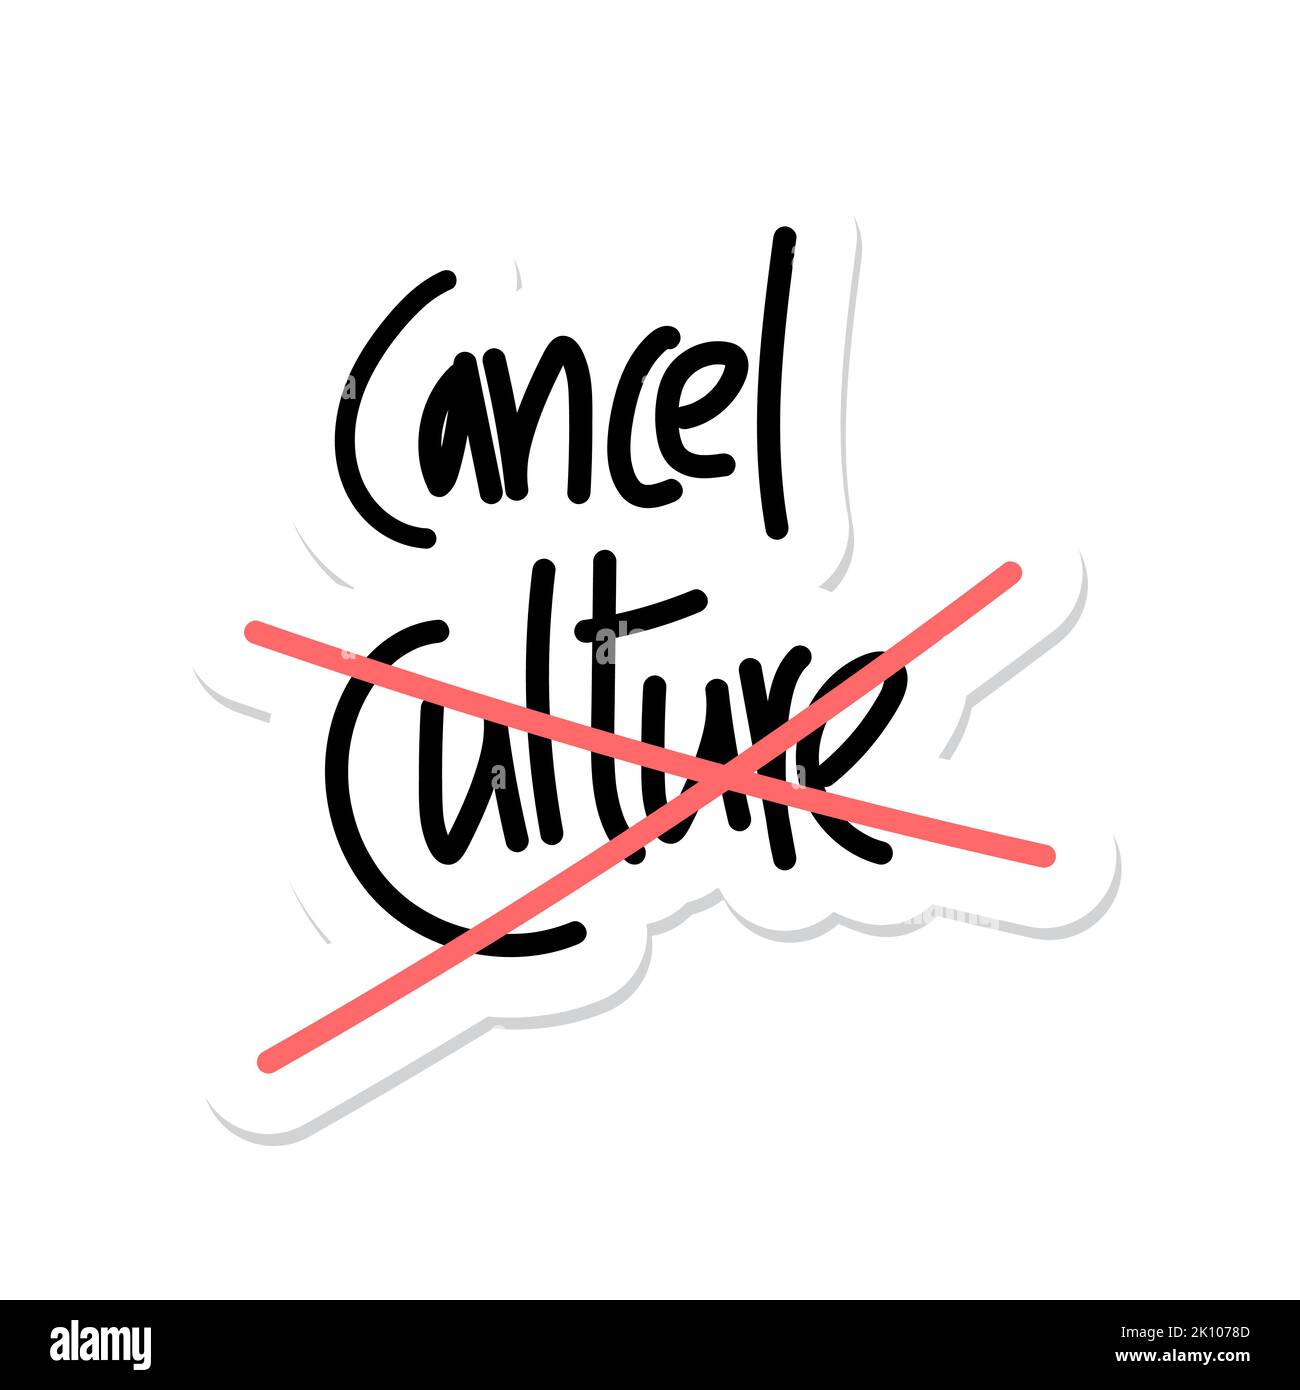 Cancel culture is a form of shaming the actions or opinions of a public figure, company, or organization. Gen z slang word in eps vector Stock Vector